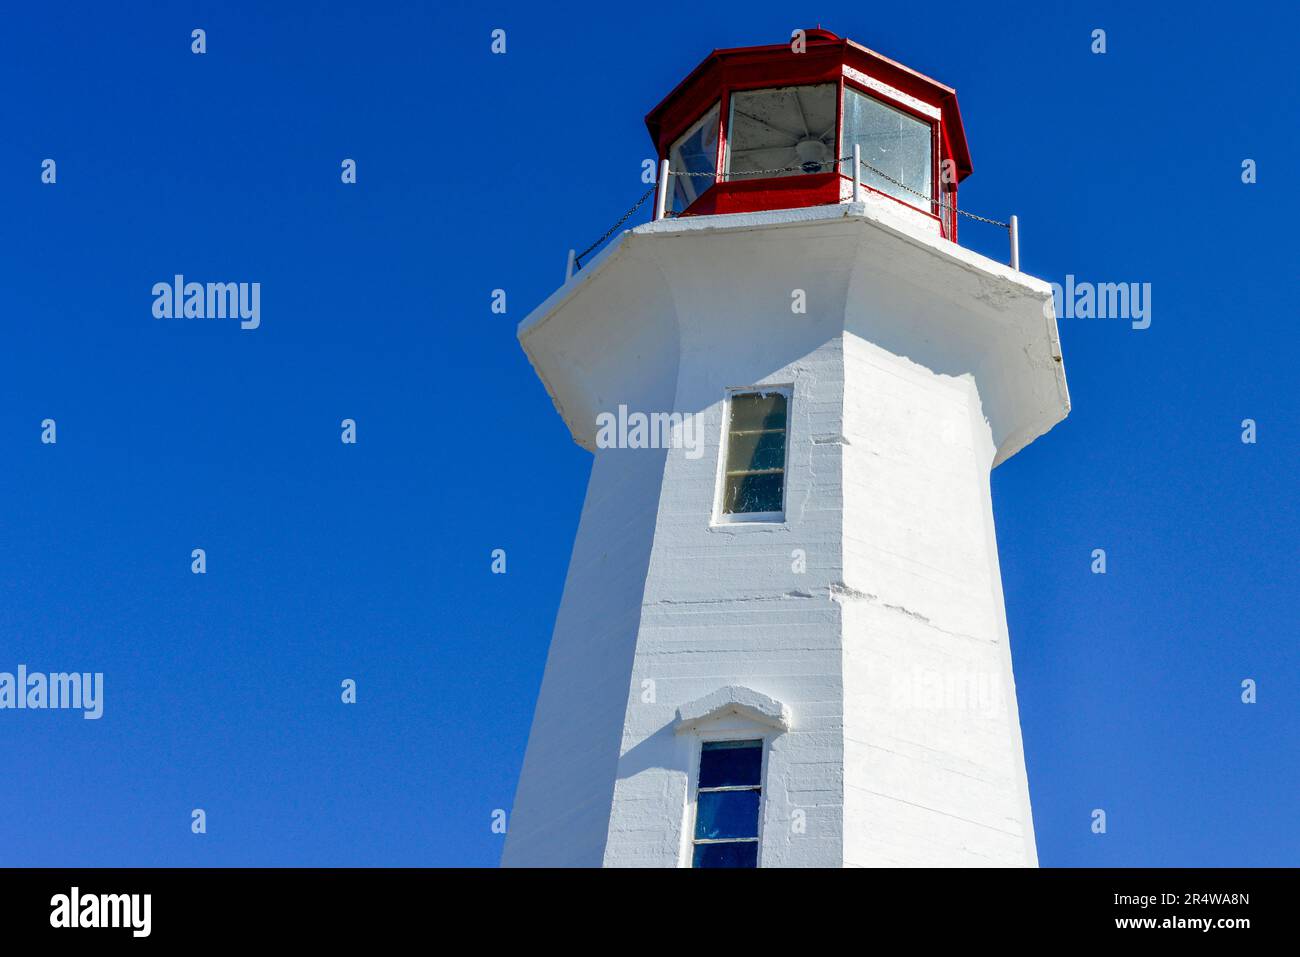 A vintage octagon shaped white concrete lighthouse with two small glass windows, a red metal watch tower with a green light, and a metal rail. Stock Photo